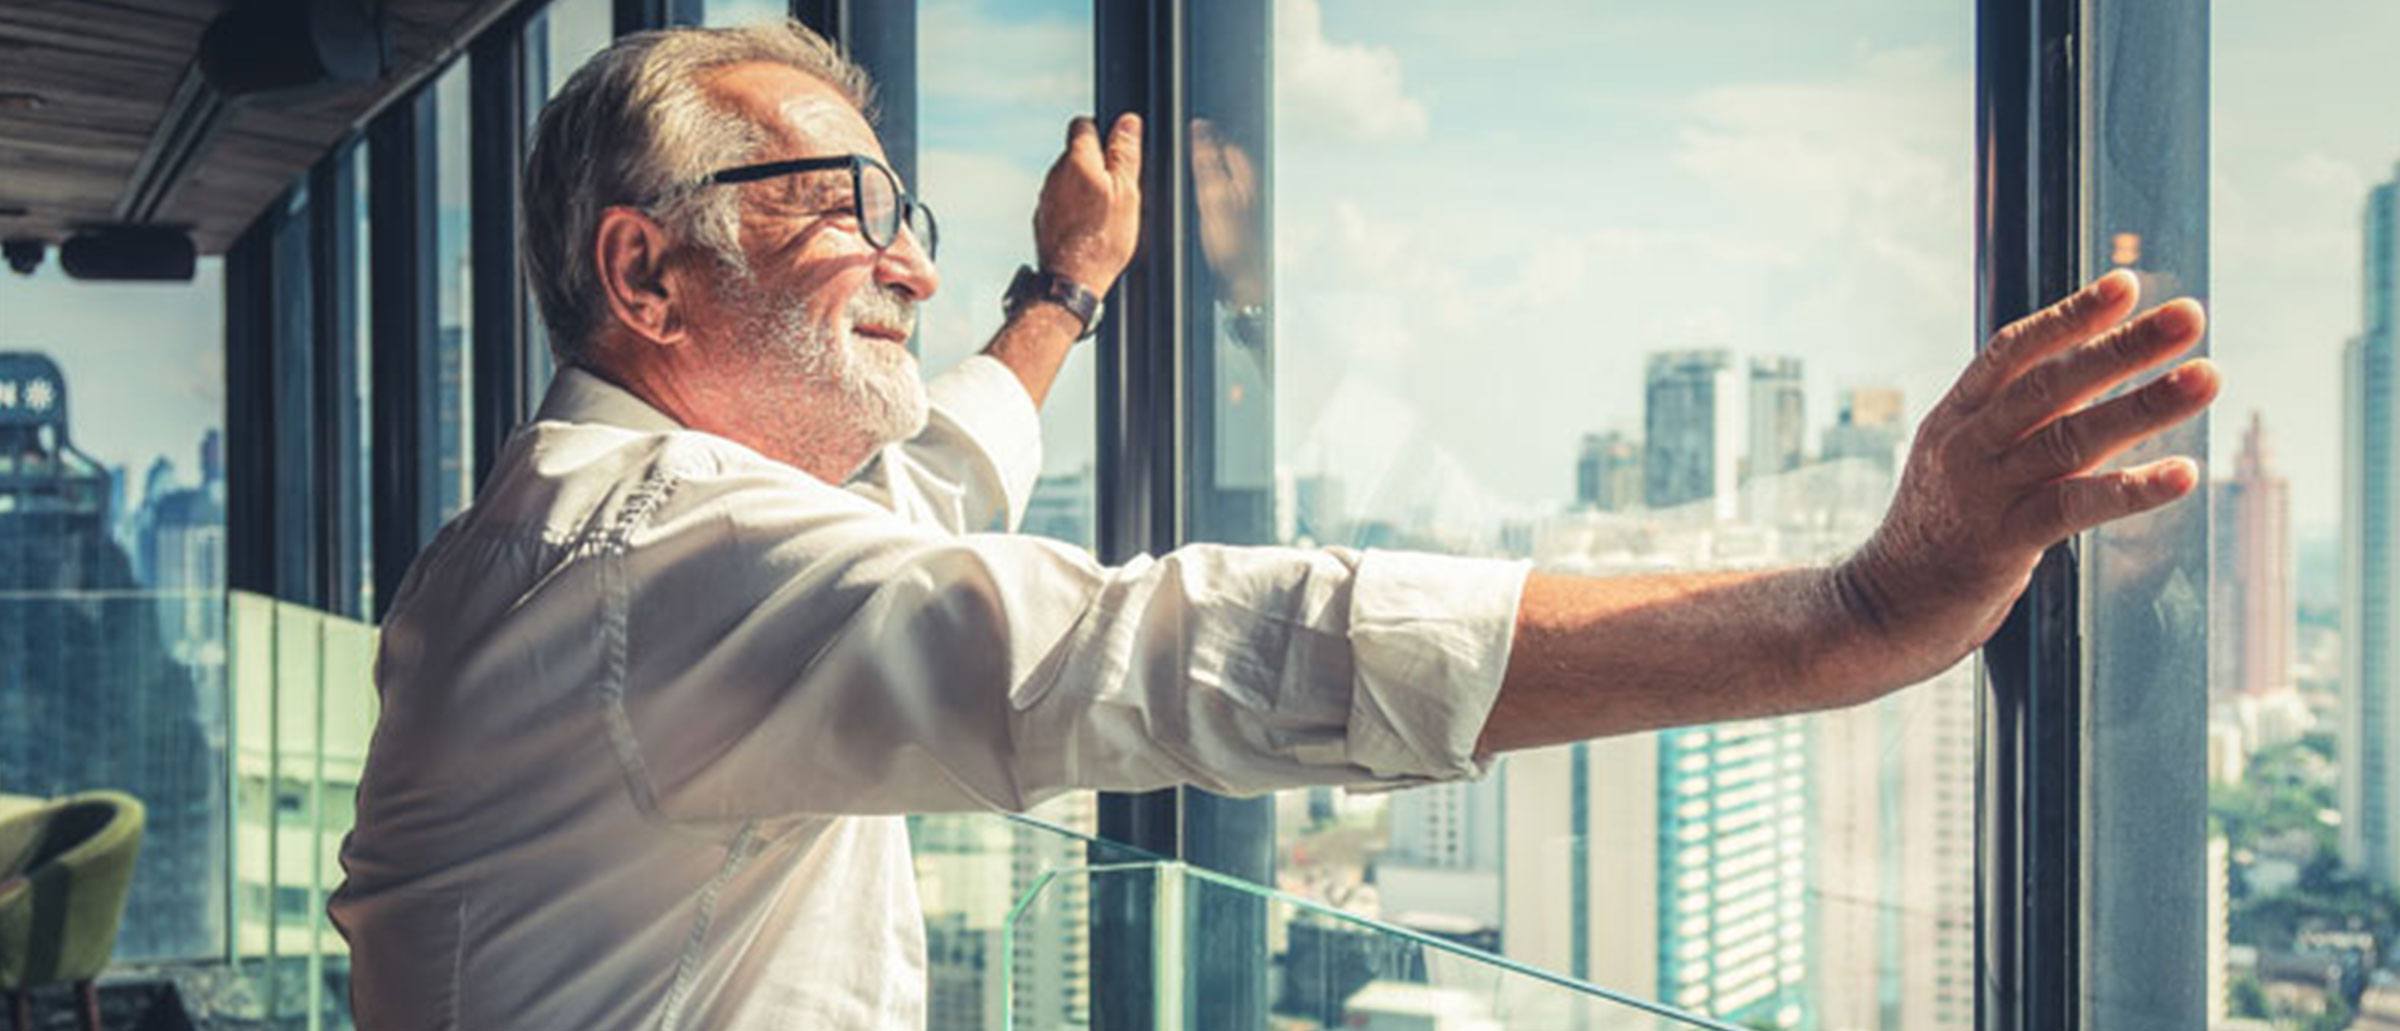 An older businessman gazing out of a window, taking in the city skyline